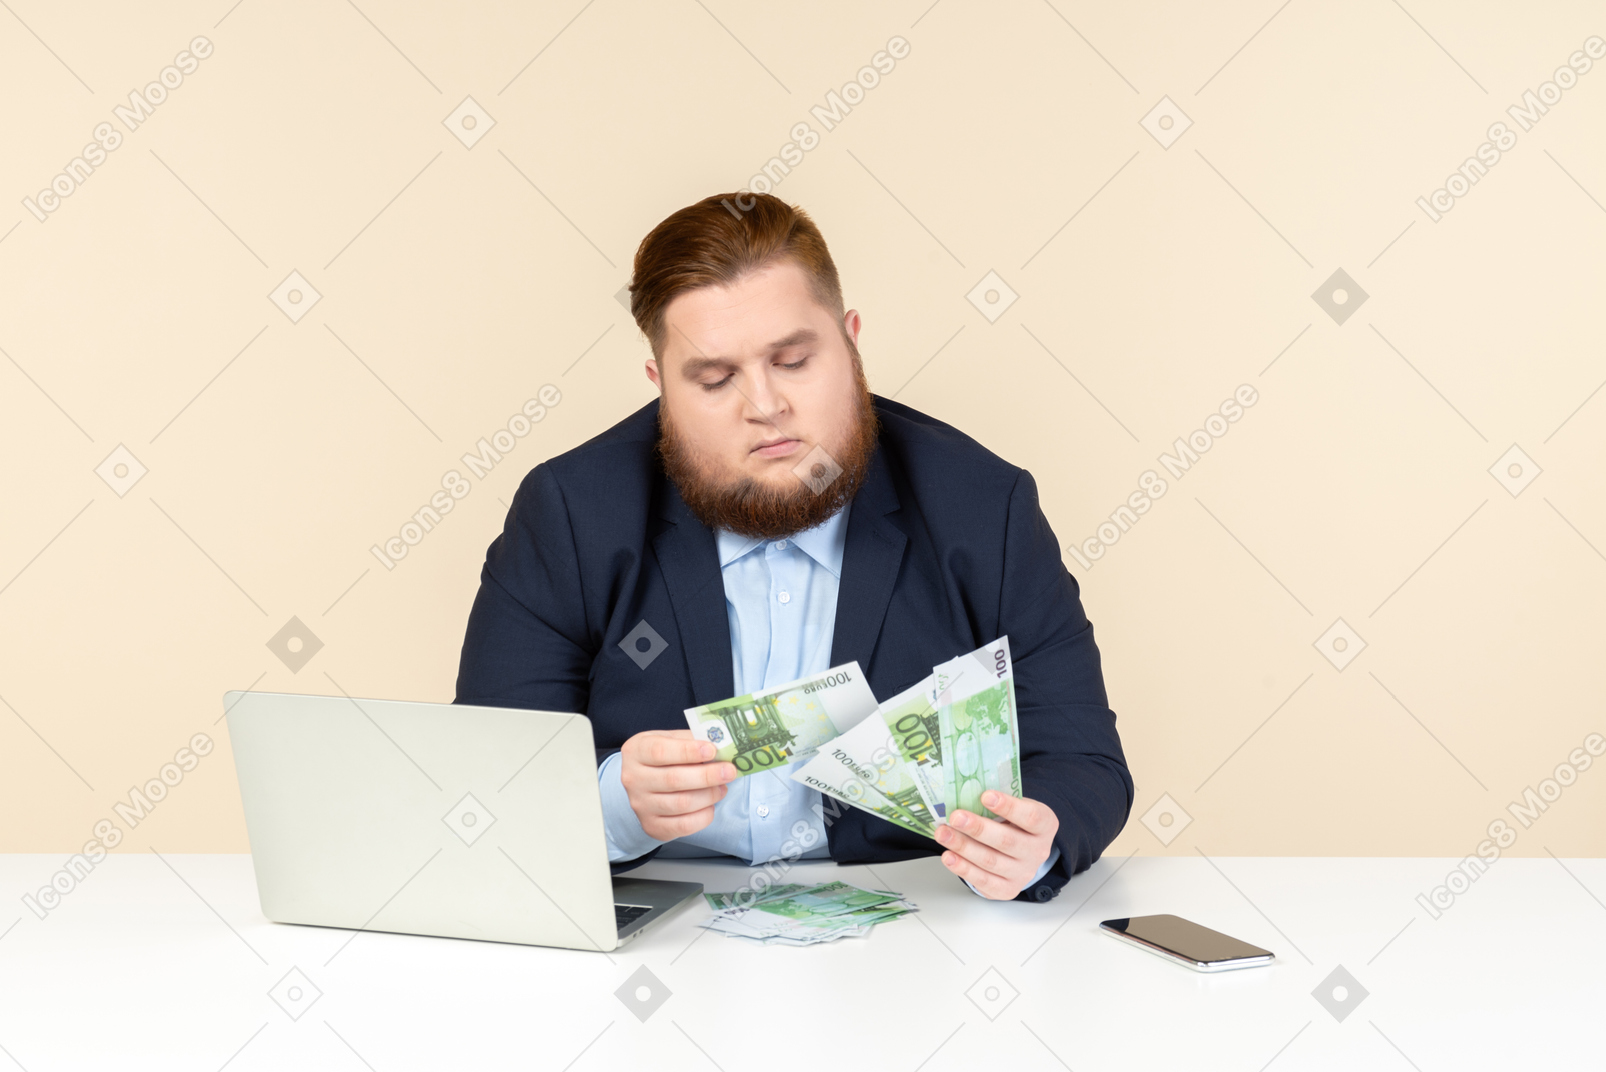 Young overweight businessman focused on counting money